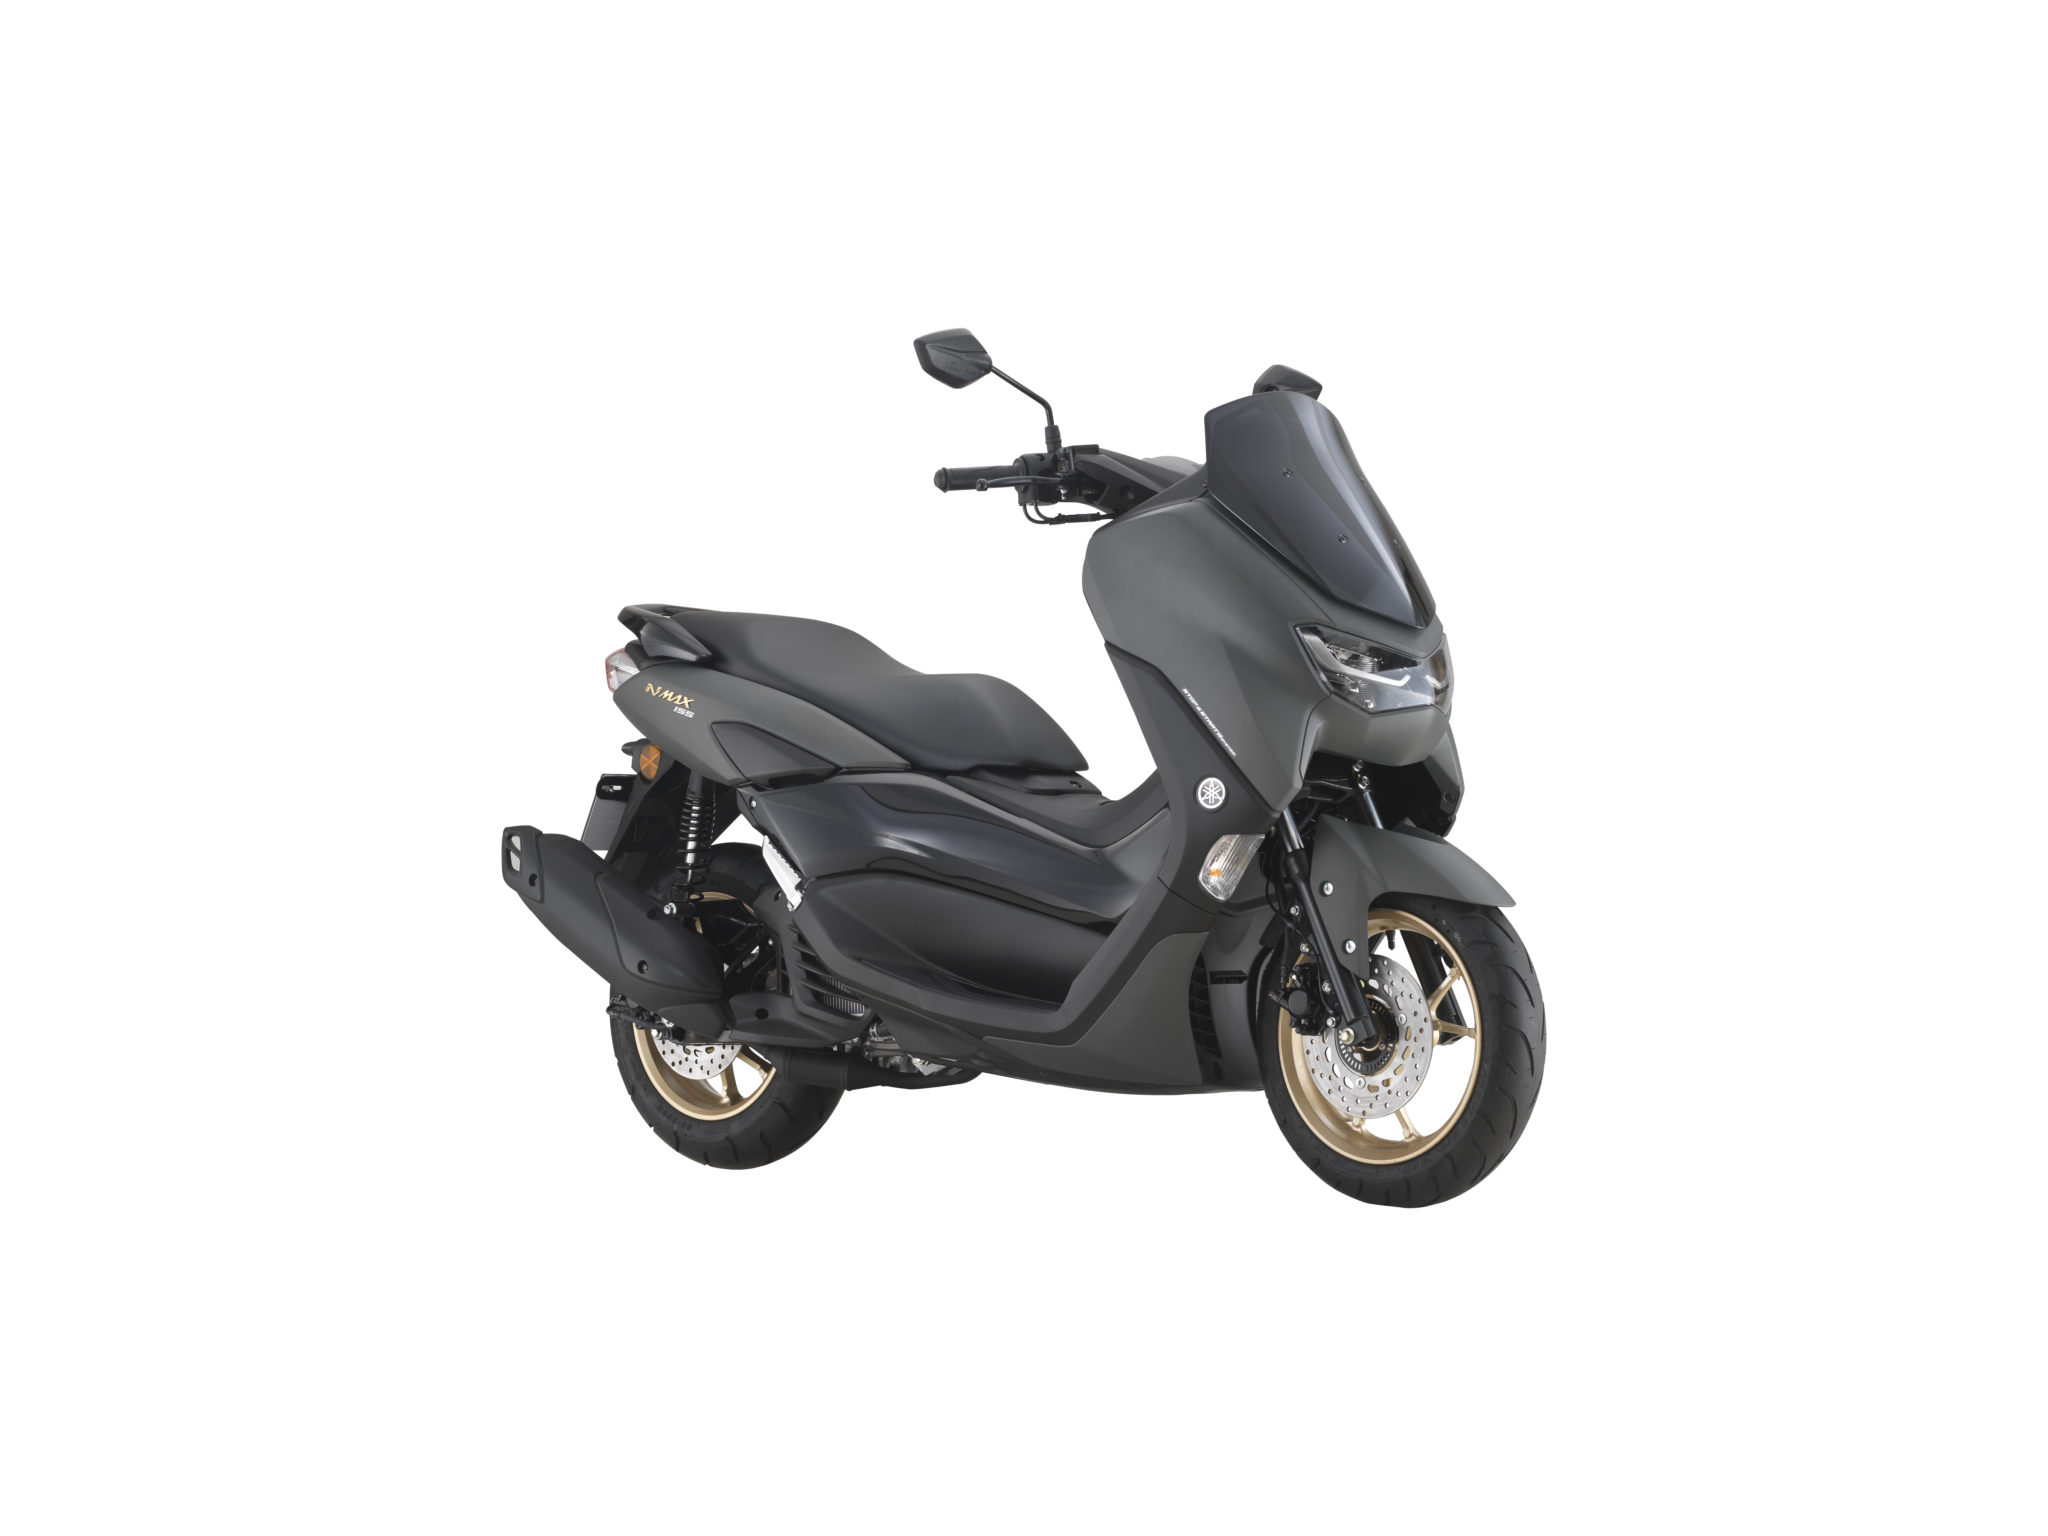 2021 Yamaha NMAX 155 launched in Malaysia - RM 8,998